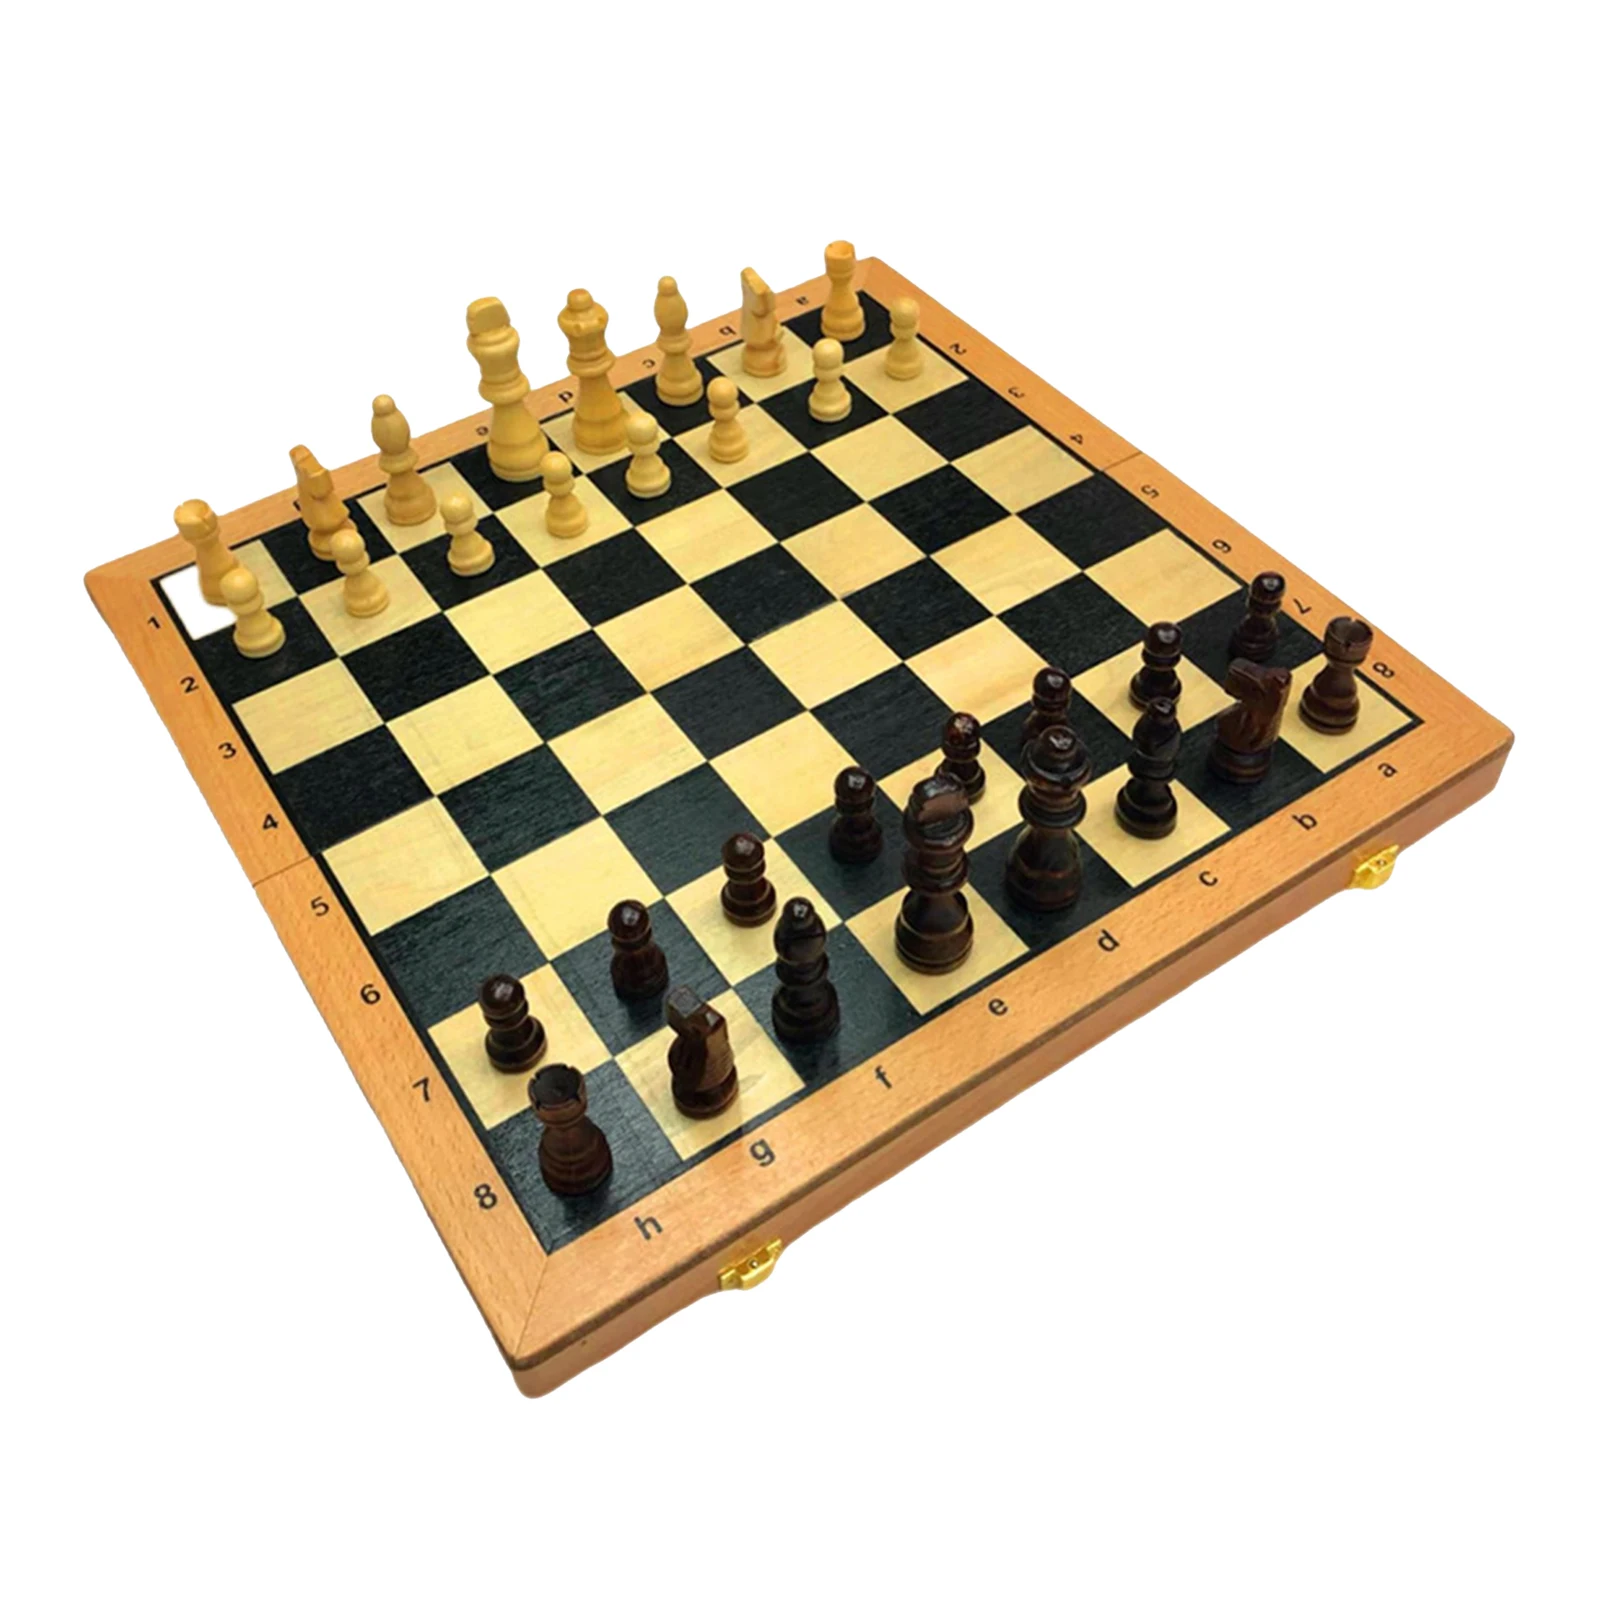 39x39cm Large Wooden Chess Set Folding Chessboard Portable Travel Handmade Vintage Board Board Game Great Gift